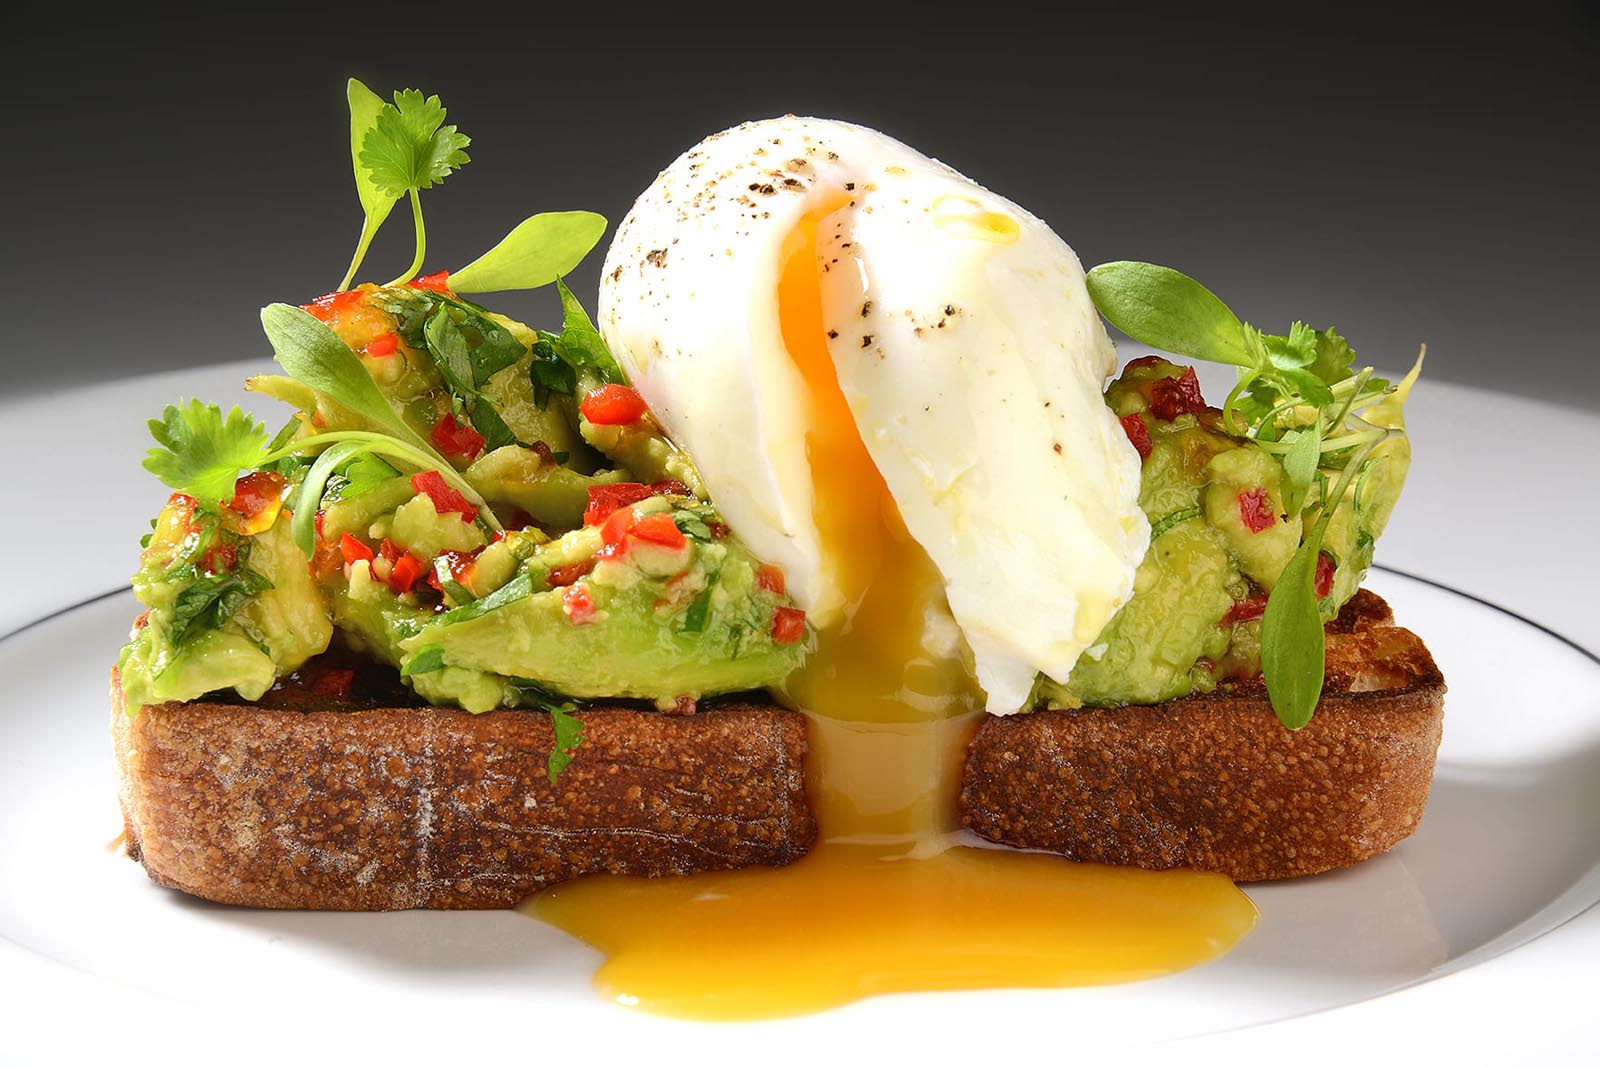 Avocado on toast with a poached egg